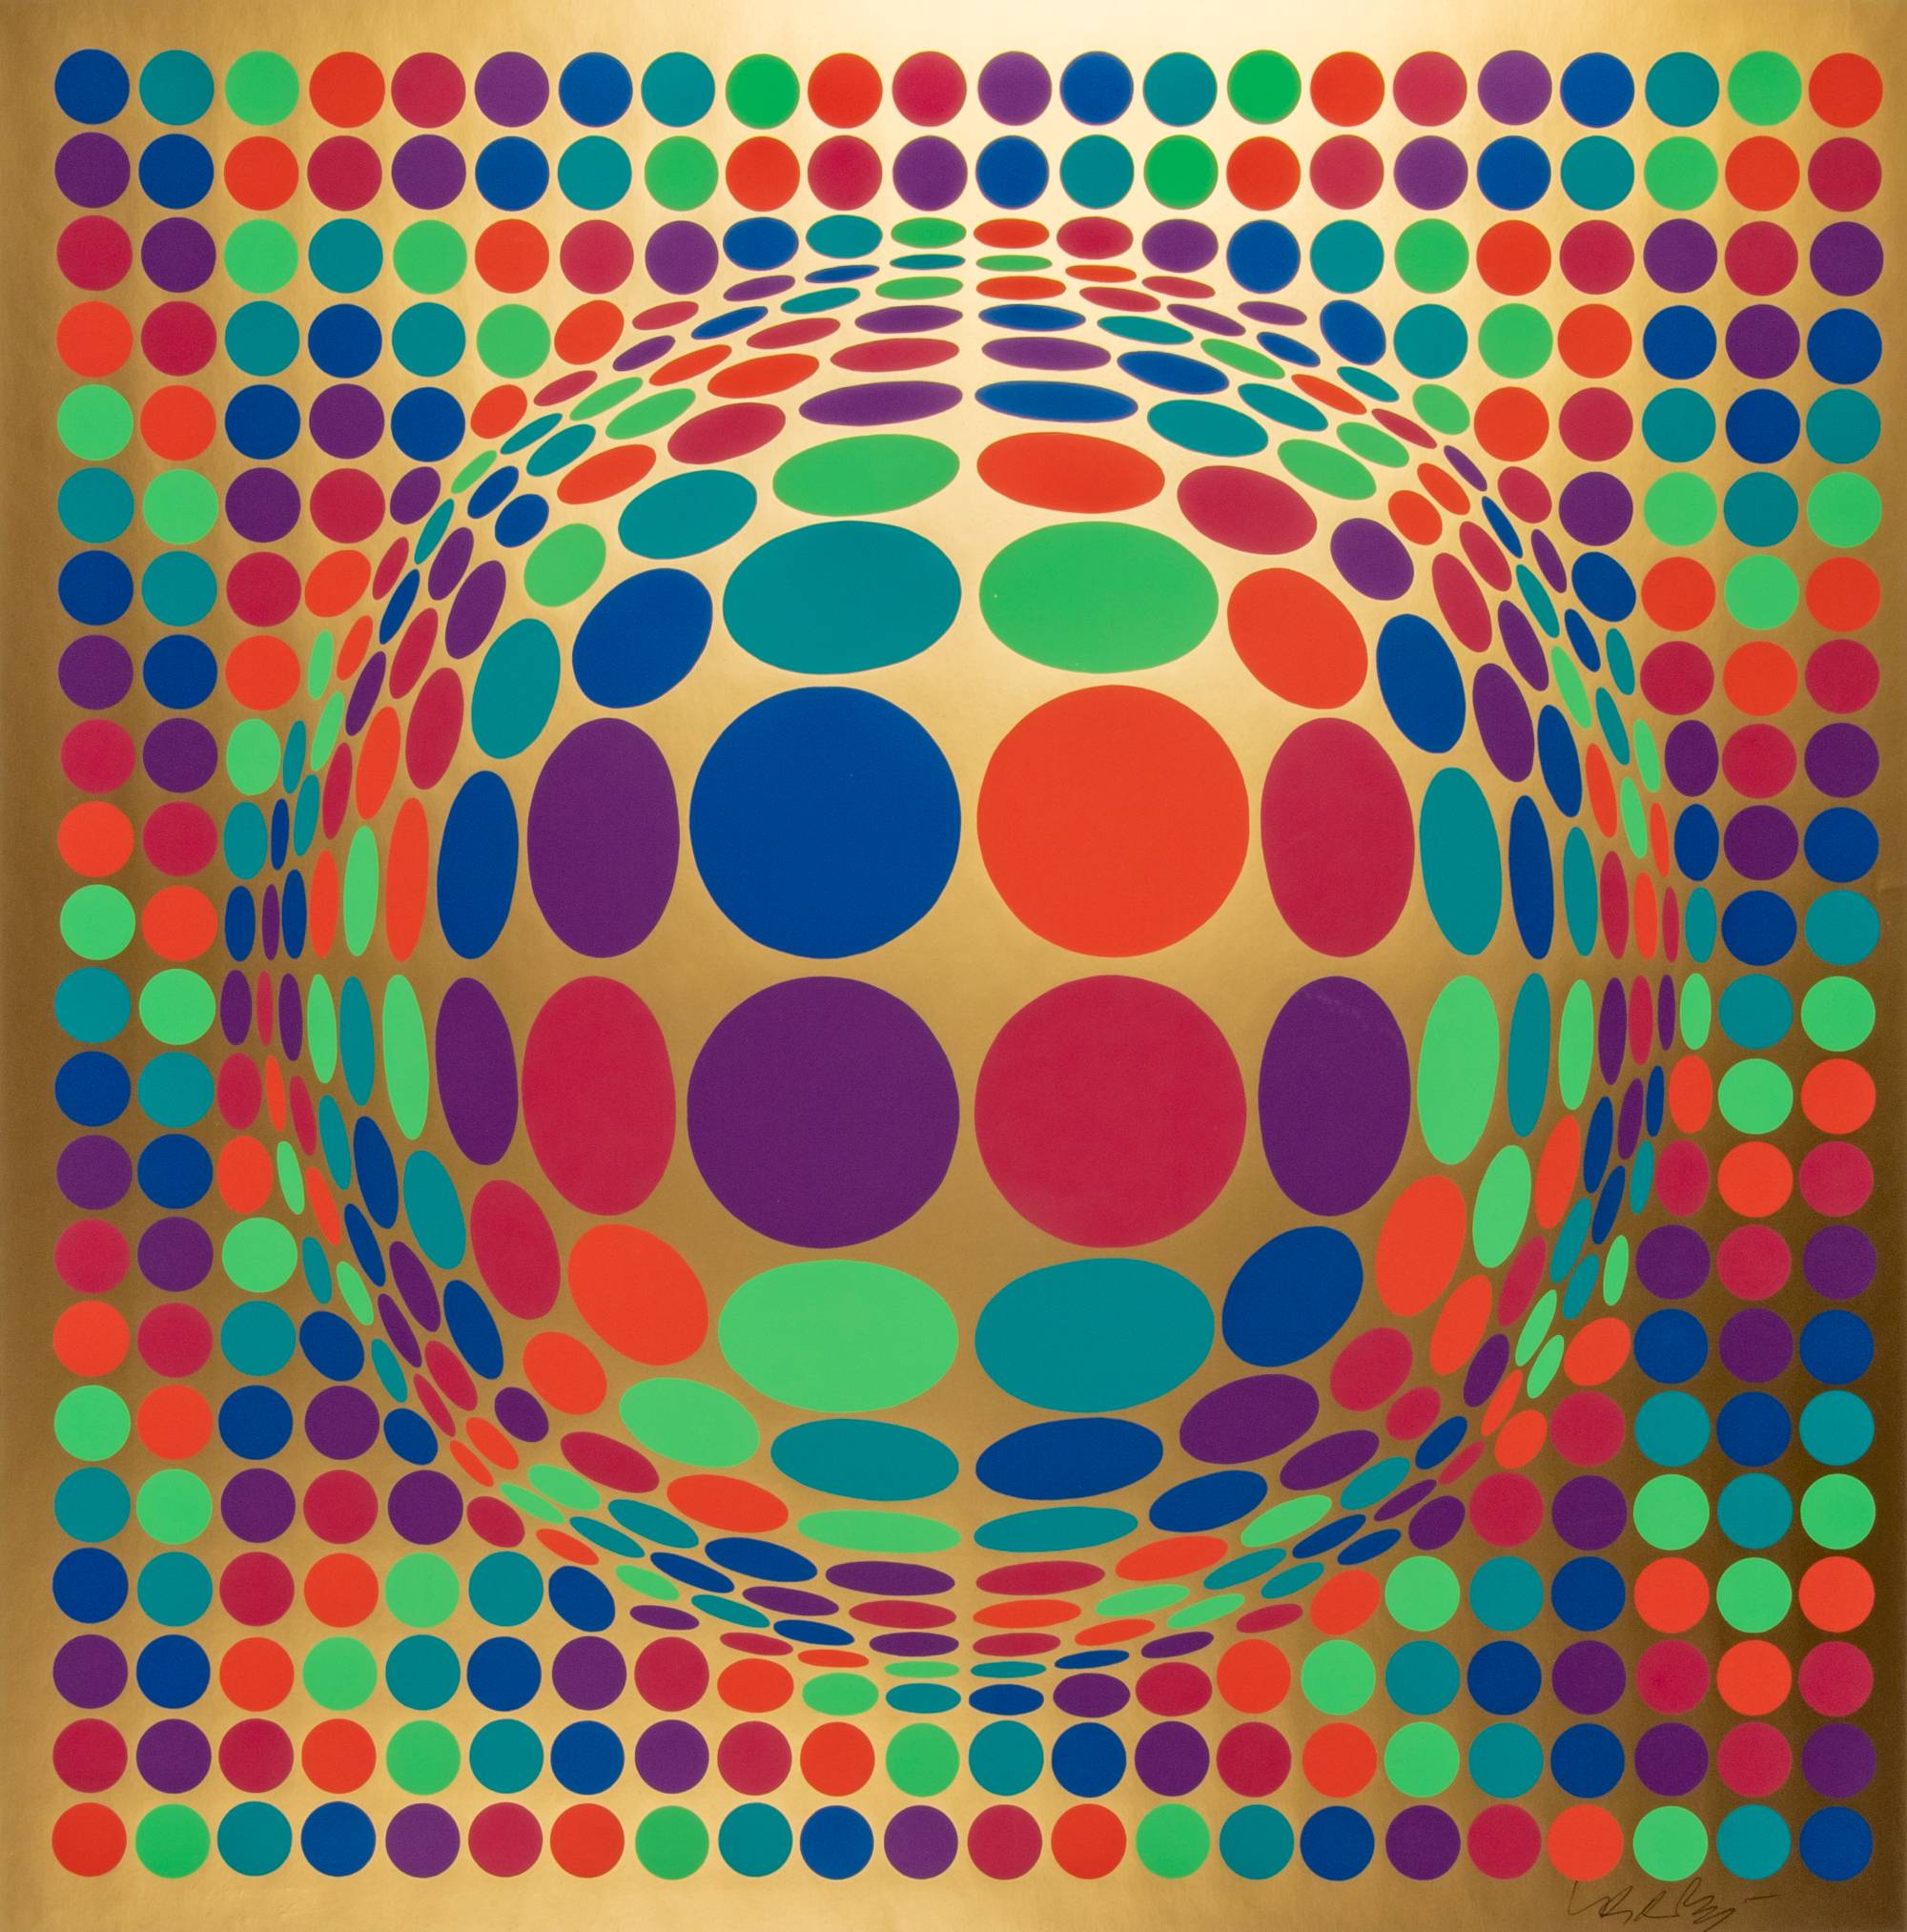 a grid of circles forming a three-dimensional sphere